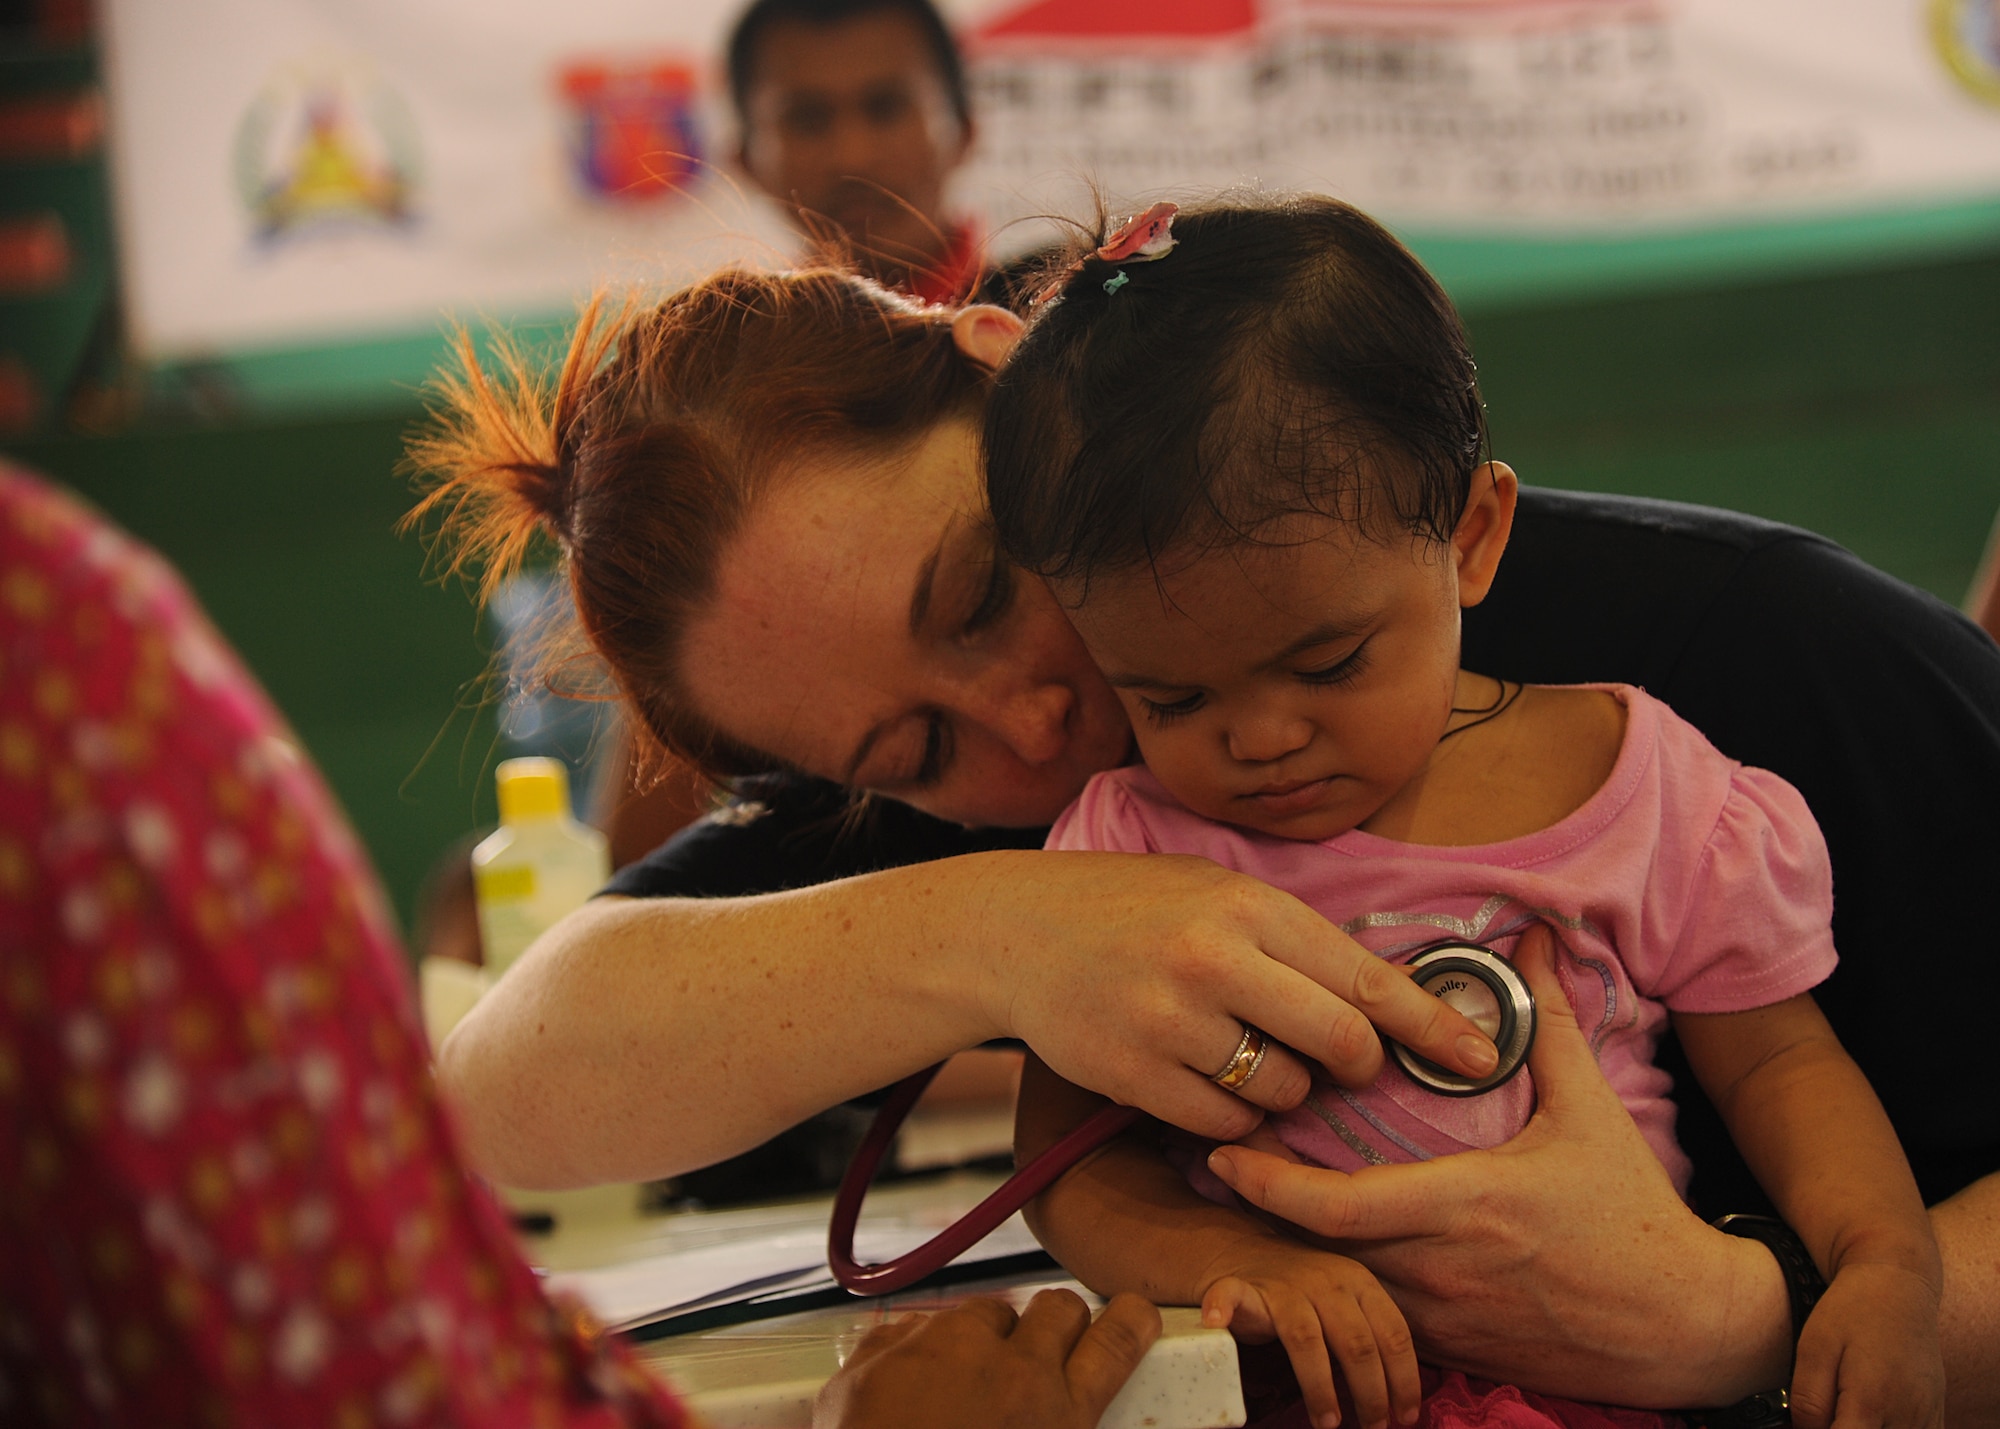 Royal Australian Air Force Cpl. Mia Woolley, medical technician, conducts a medical screening on Trica, a 1-year-old from Lila, Bohol province, Philippines, during the Health Services Outreach provided as part of the Pacific Angel Philippines mission taking place in Lila, Bohol province, Philippines, Aug. 16, 2015. Efforts undertaken during Pacific Angel help multilateral militaries in the Pacific improve and build relationships across a wide spectrum of civic operations, which bolsters each nation’s capacity to respond and support future humanitarian assistance and disaster relief operations. (U.S. Air Force photo by Tech. Sgt. Aaron Oelrich/Released)